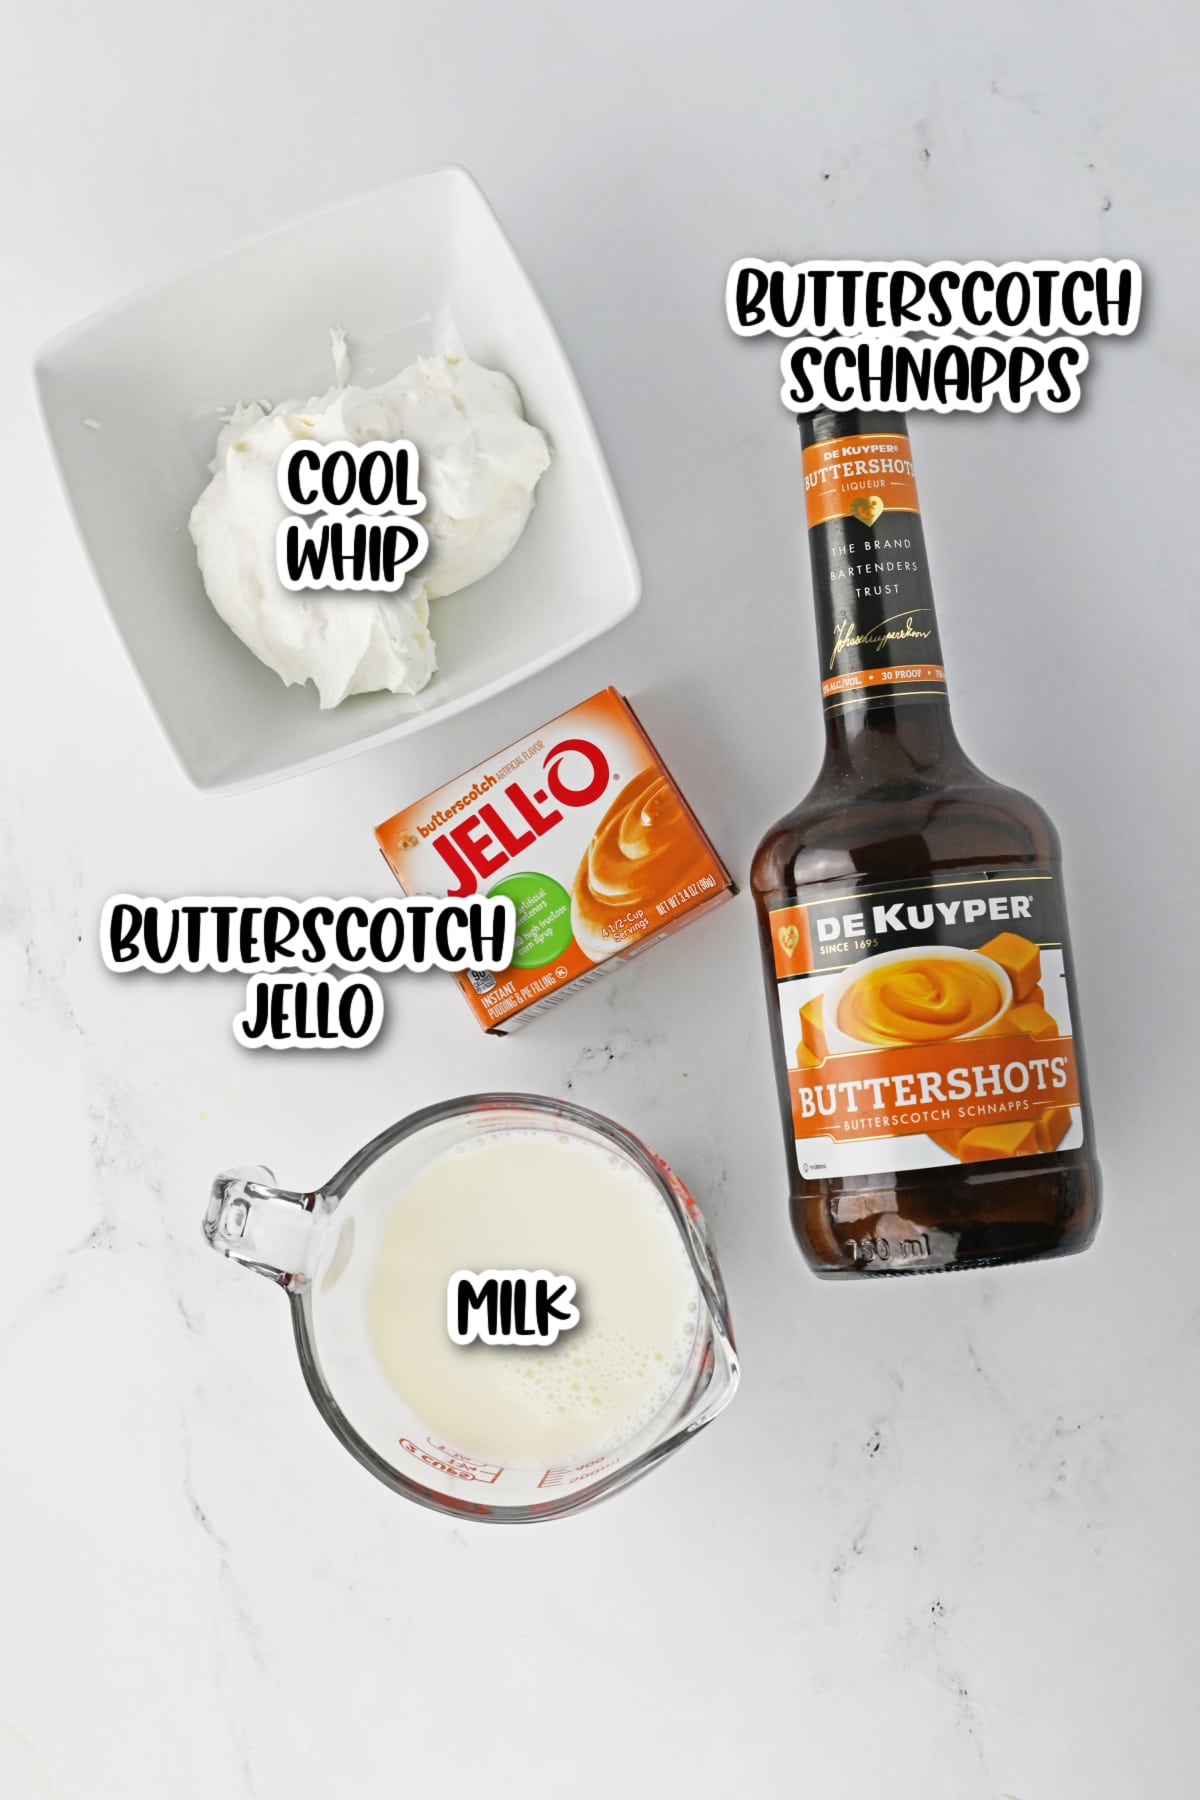 Ingredients for butterscotch pudding shots